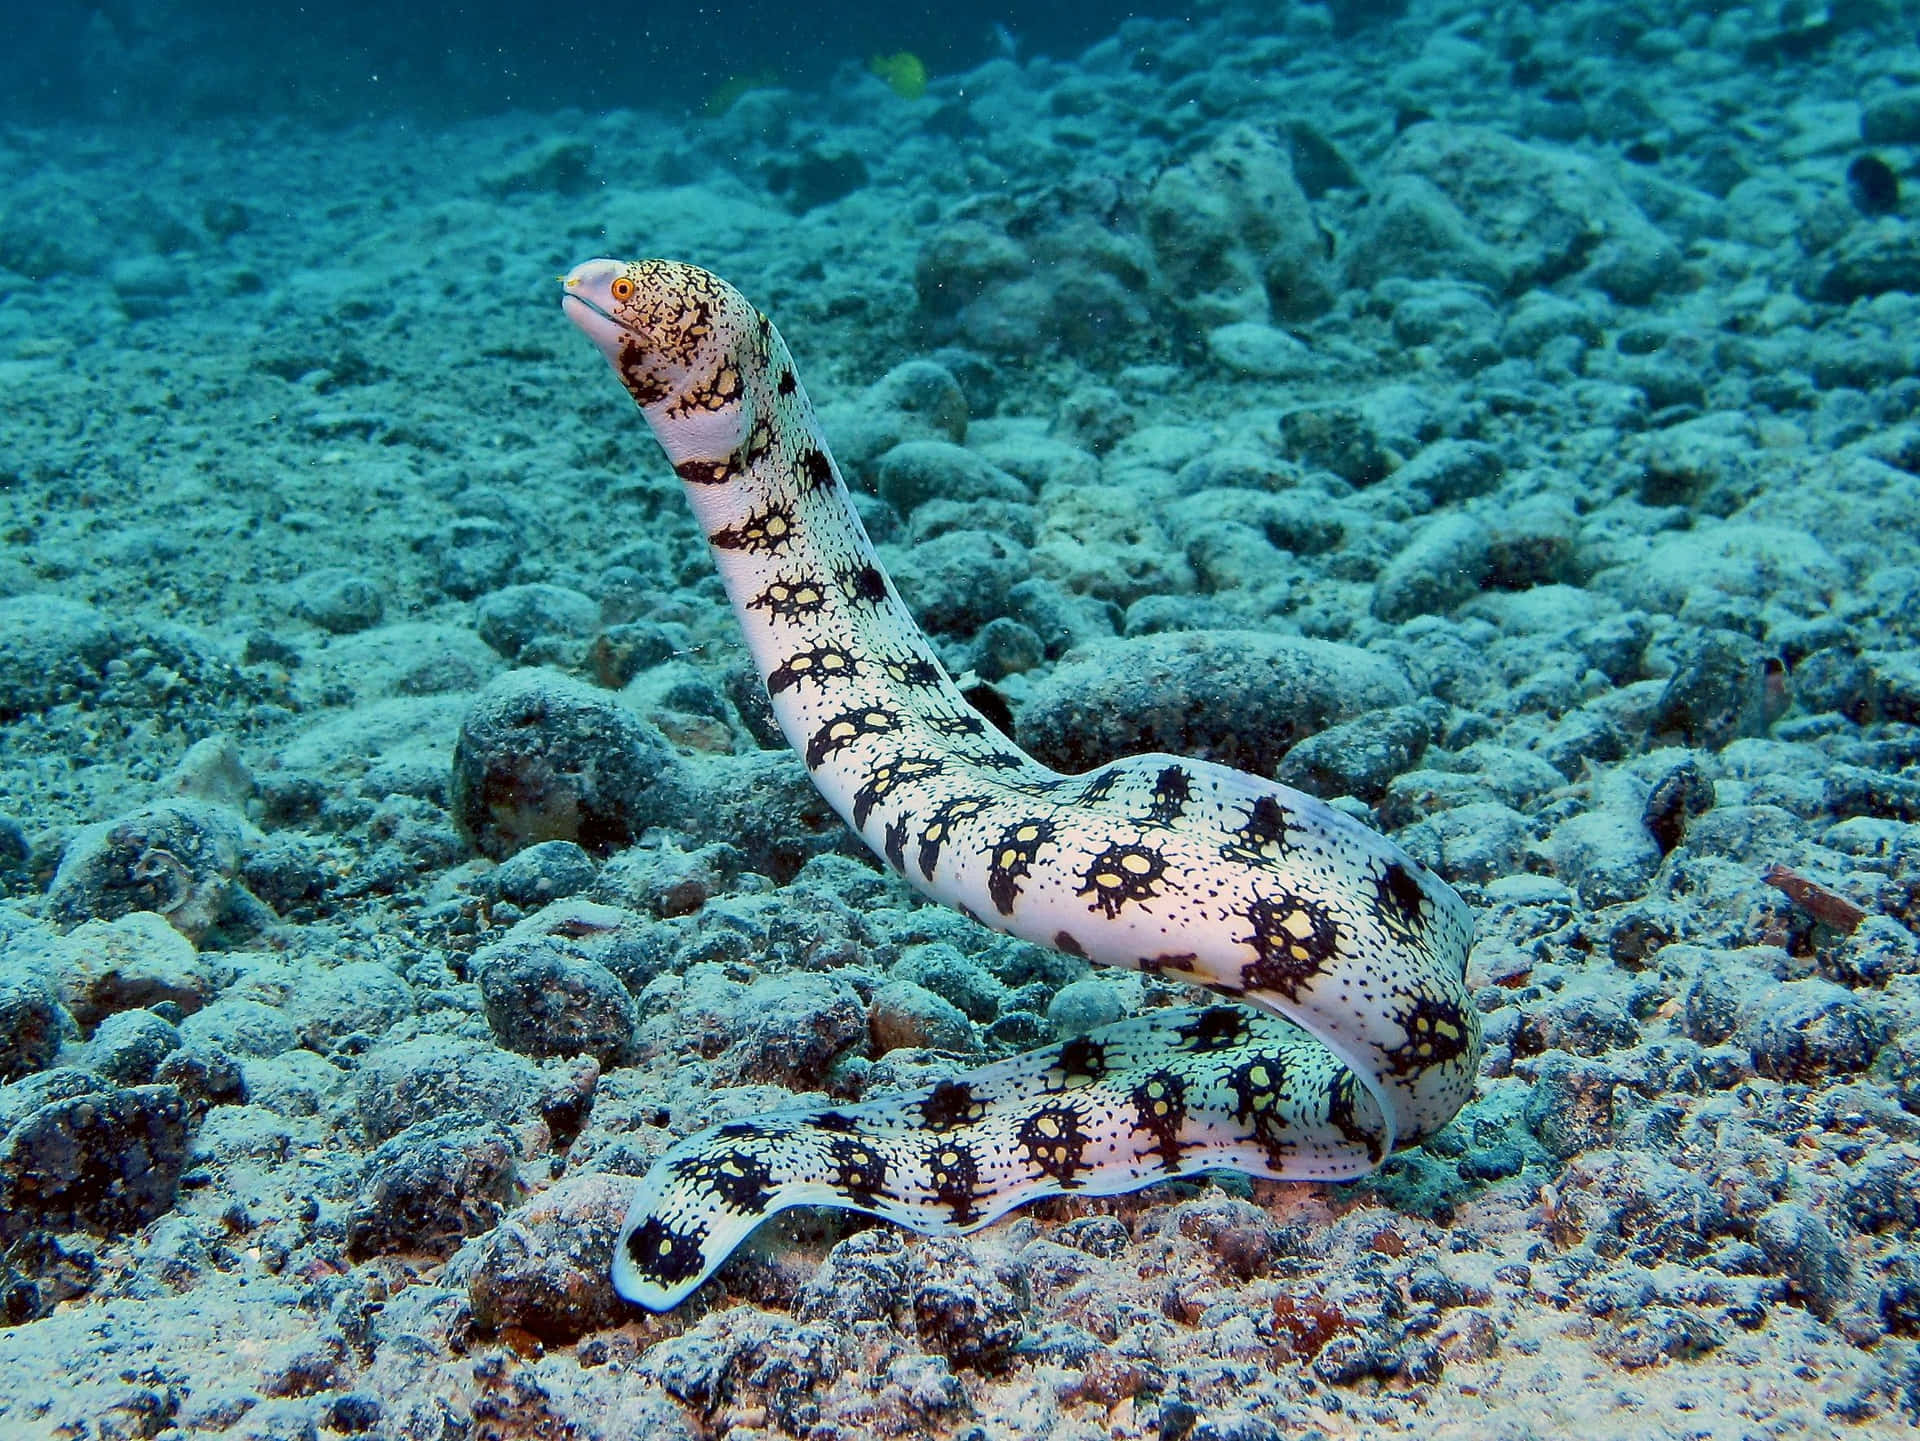 A Freshly-caught Eel Swimming In A Shallow Water